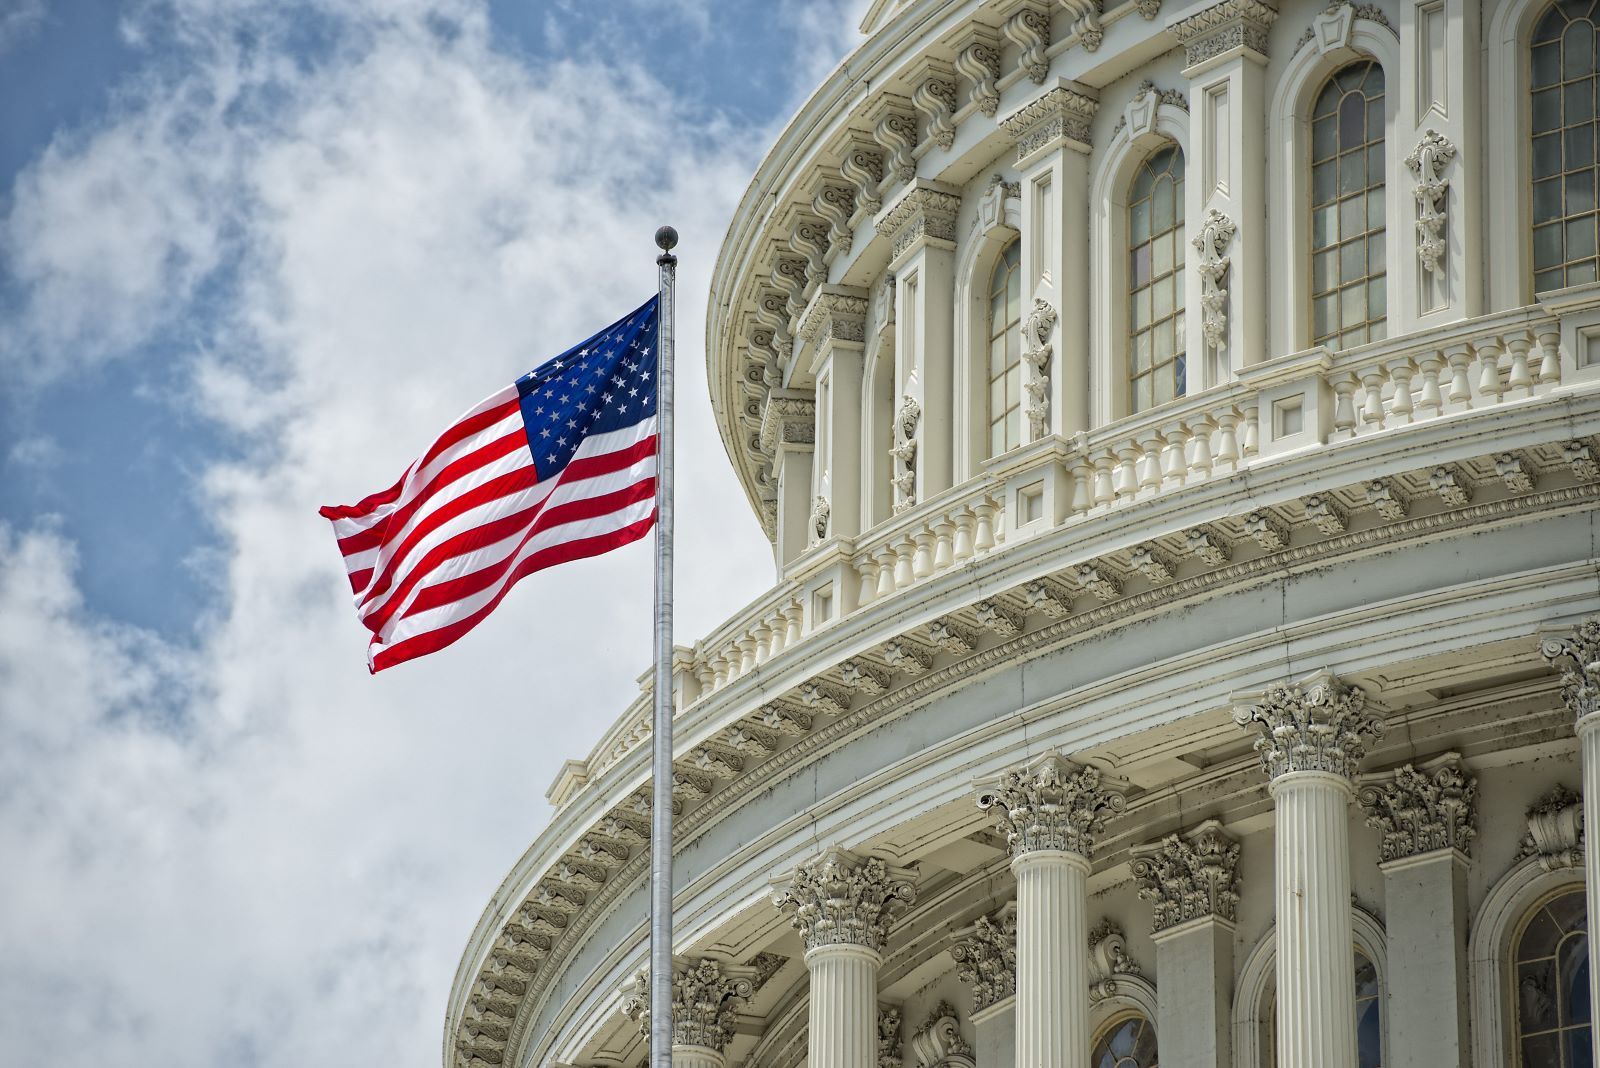 Image Credit: Shutterstock / Andrea Izzotti <p><span>While the bill will not be voted on until sessions start again next year, many are hopeful. With a lack of opposition in its initial pass-through, many are eager to see its awaited enactment.</span></p>